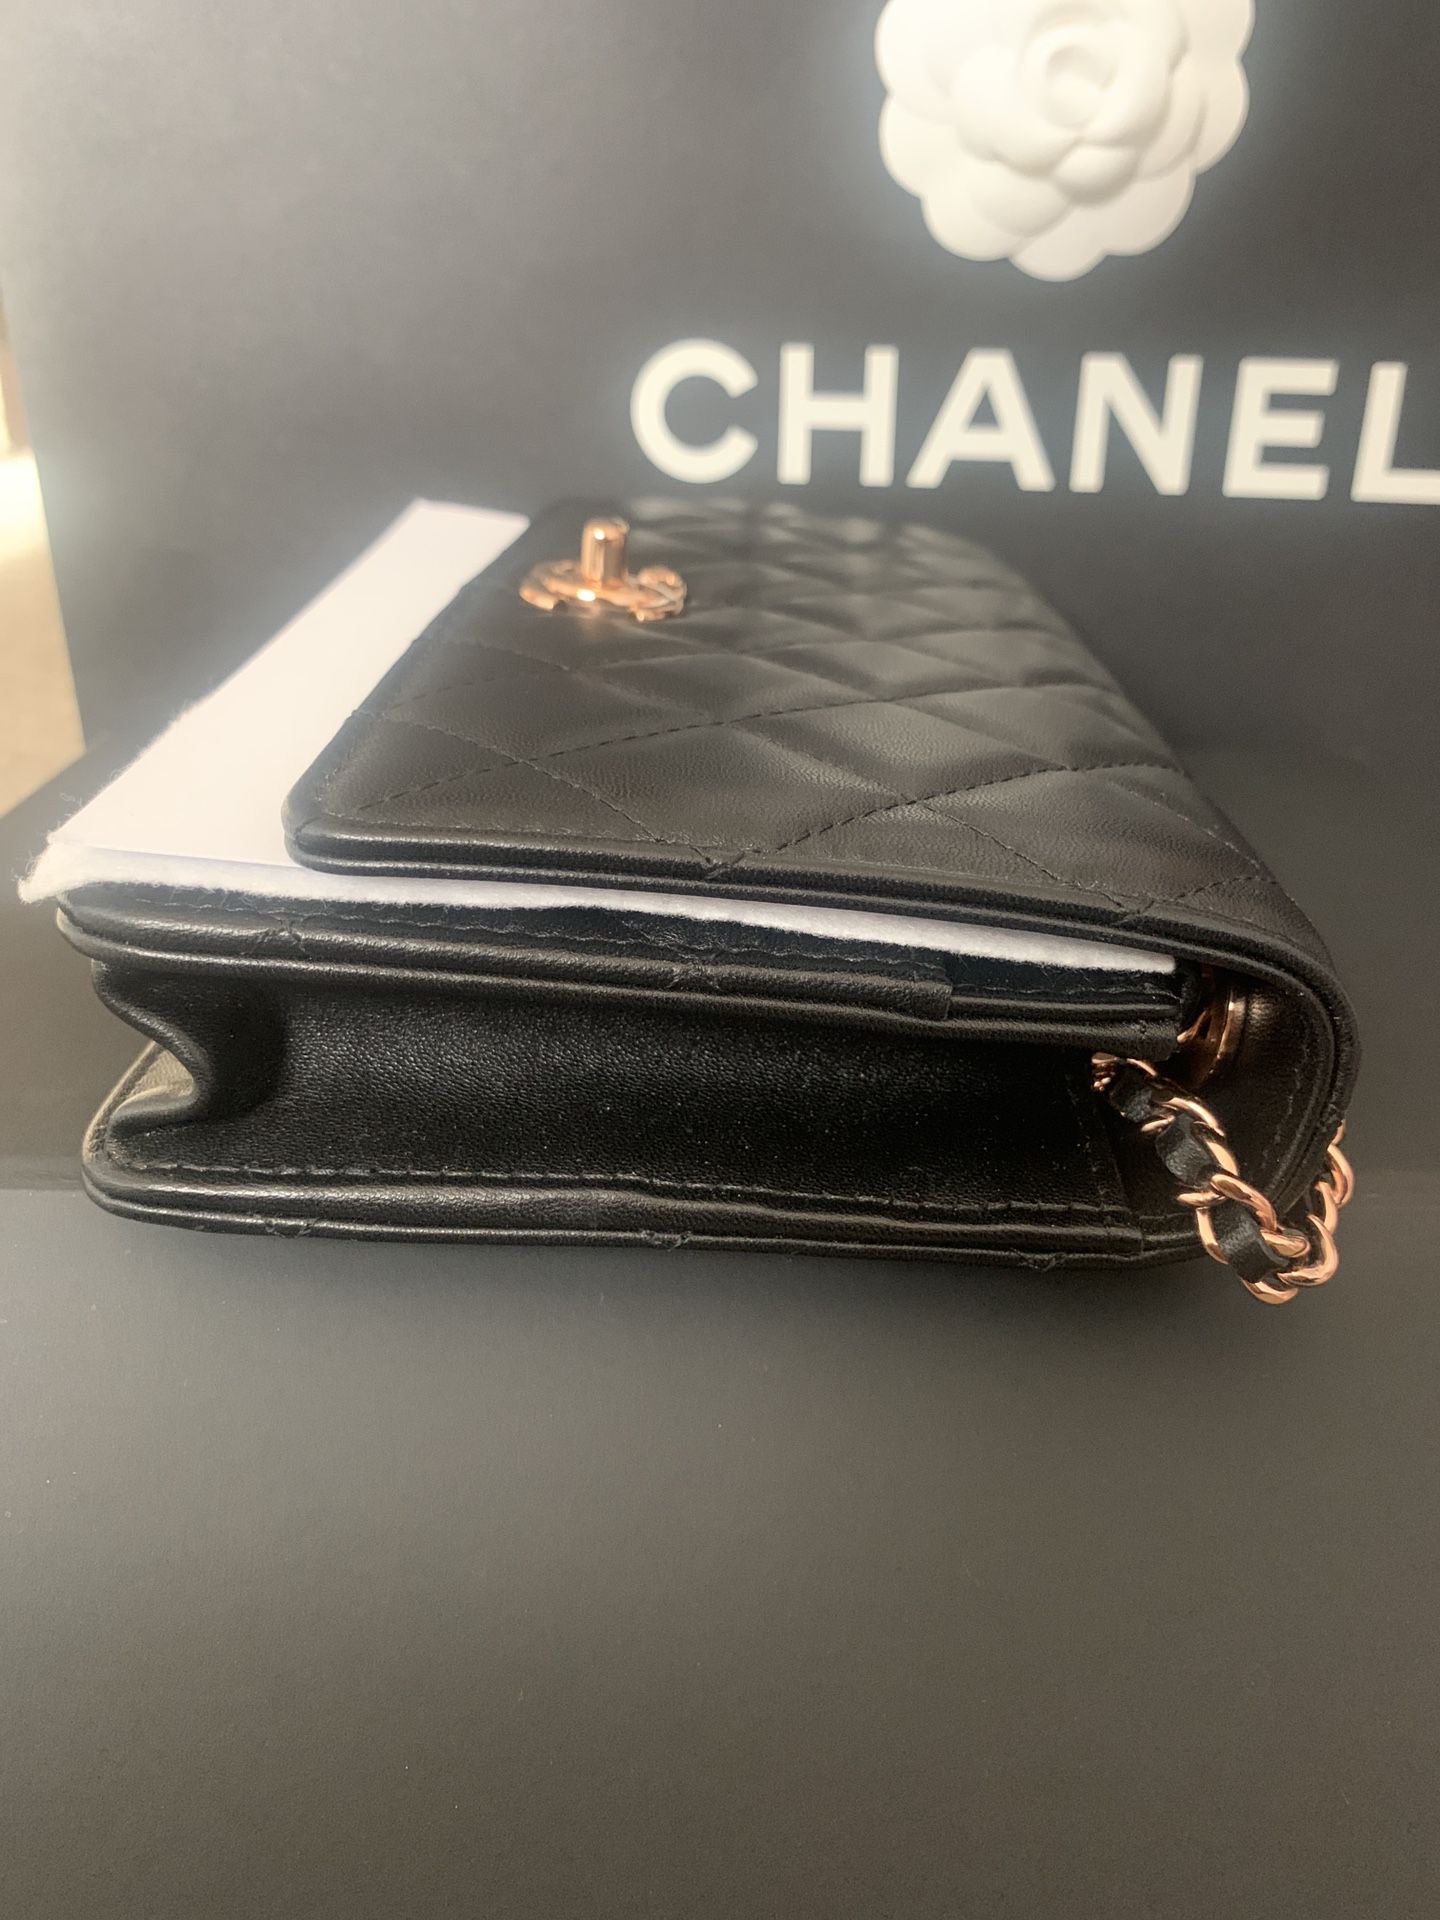 CHANEL, Bags, Chanel Vip Gift Bag Wallet Coin Pouch New